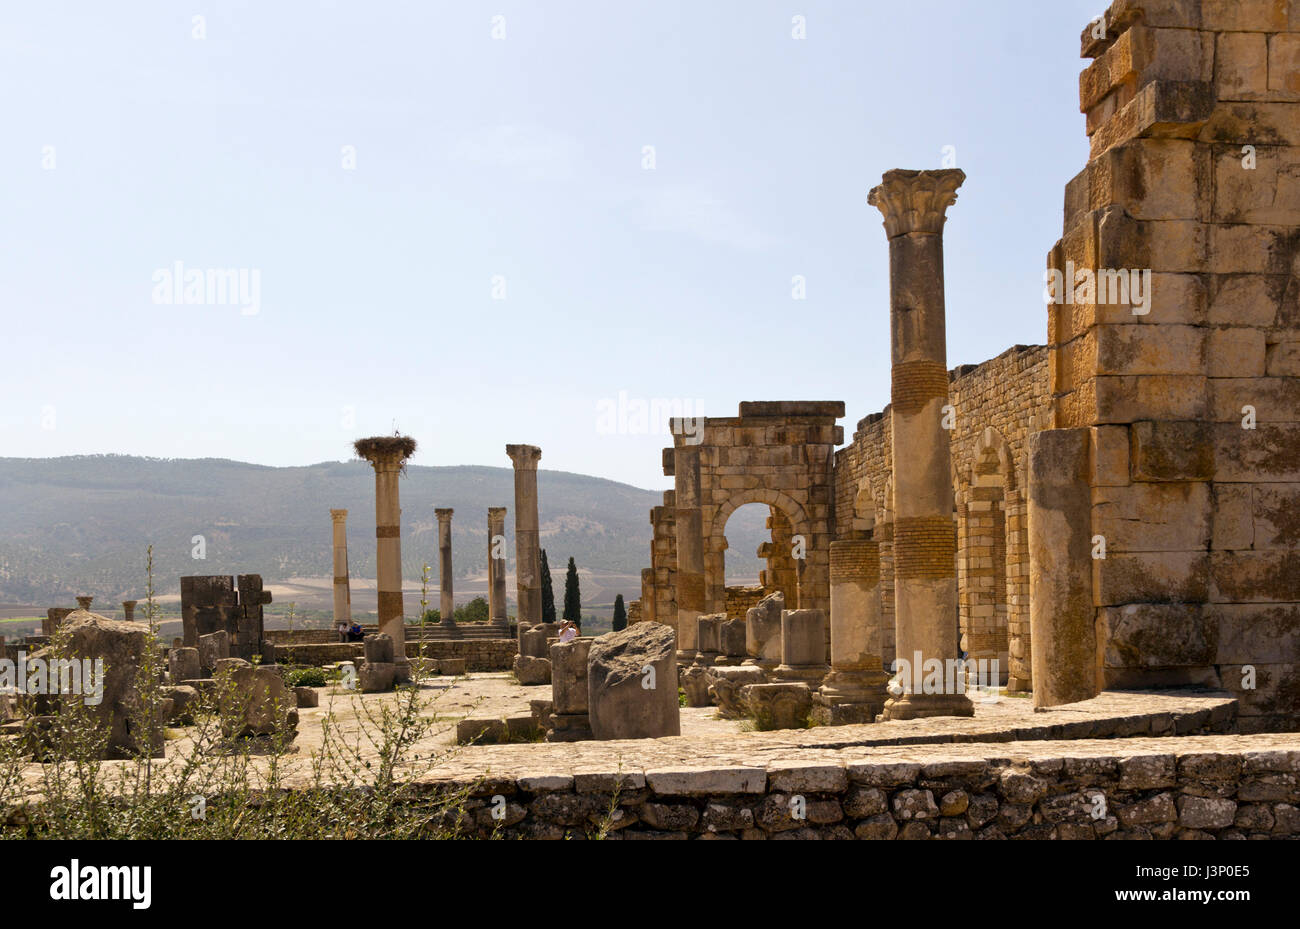 Arches and Columns of the old basilica in the Ruins of the ancient Roman City of Volubilis, Morocco Stock Photo